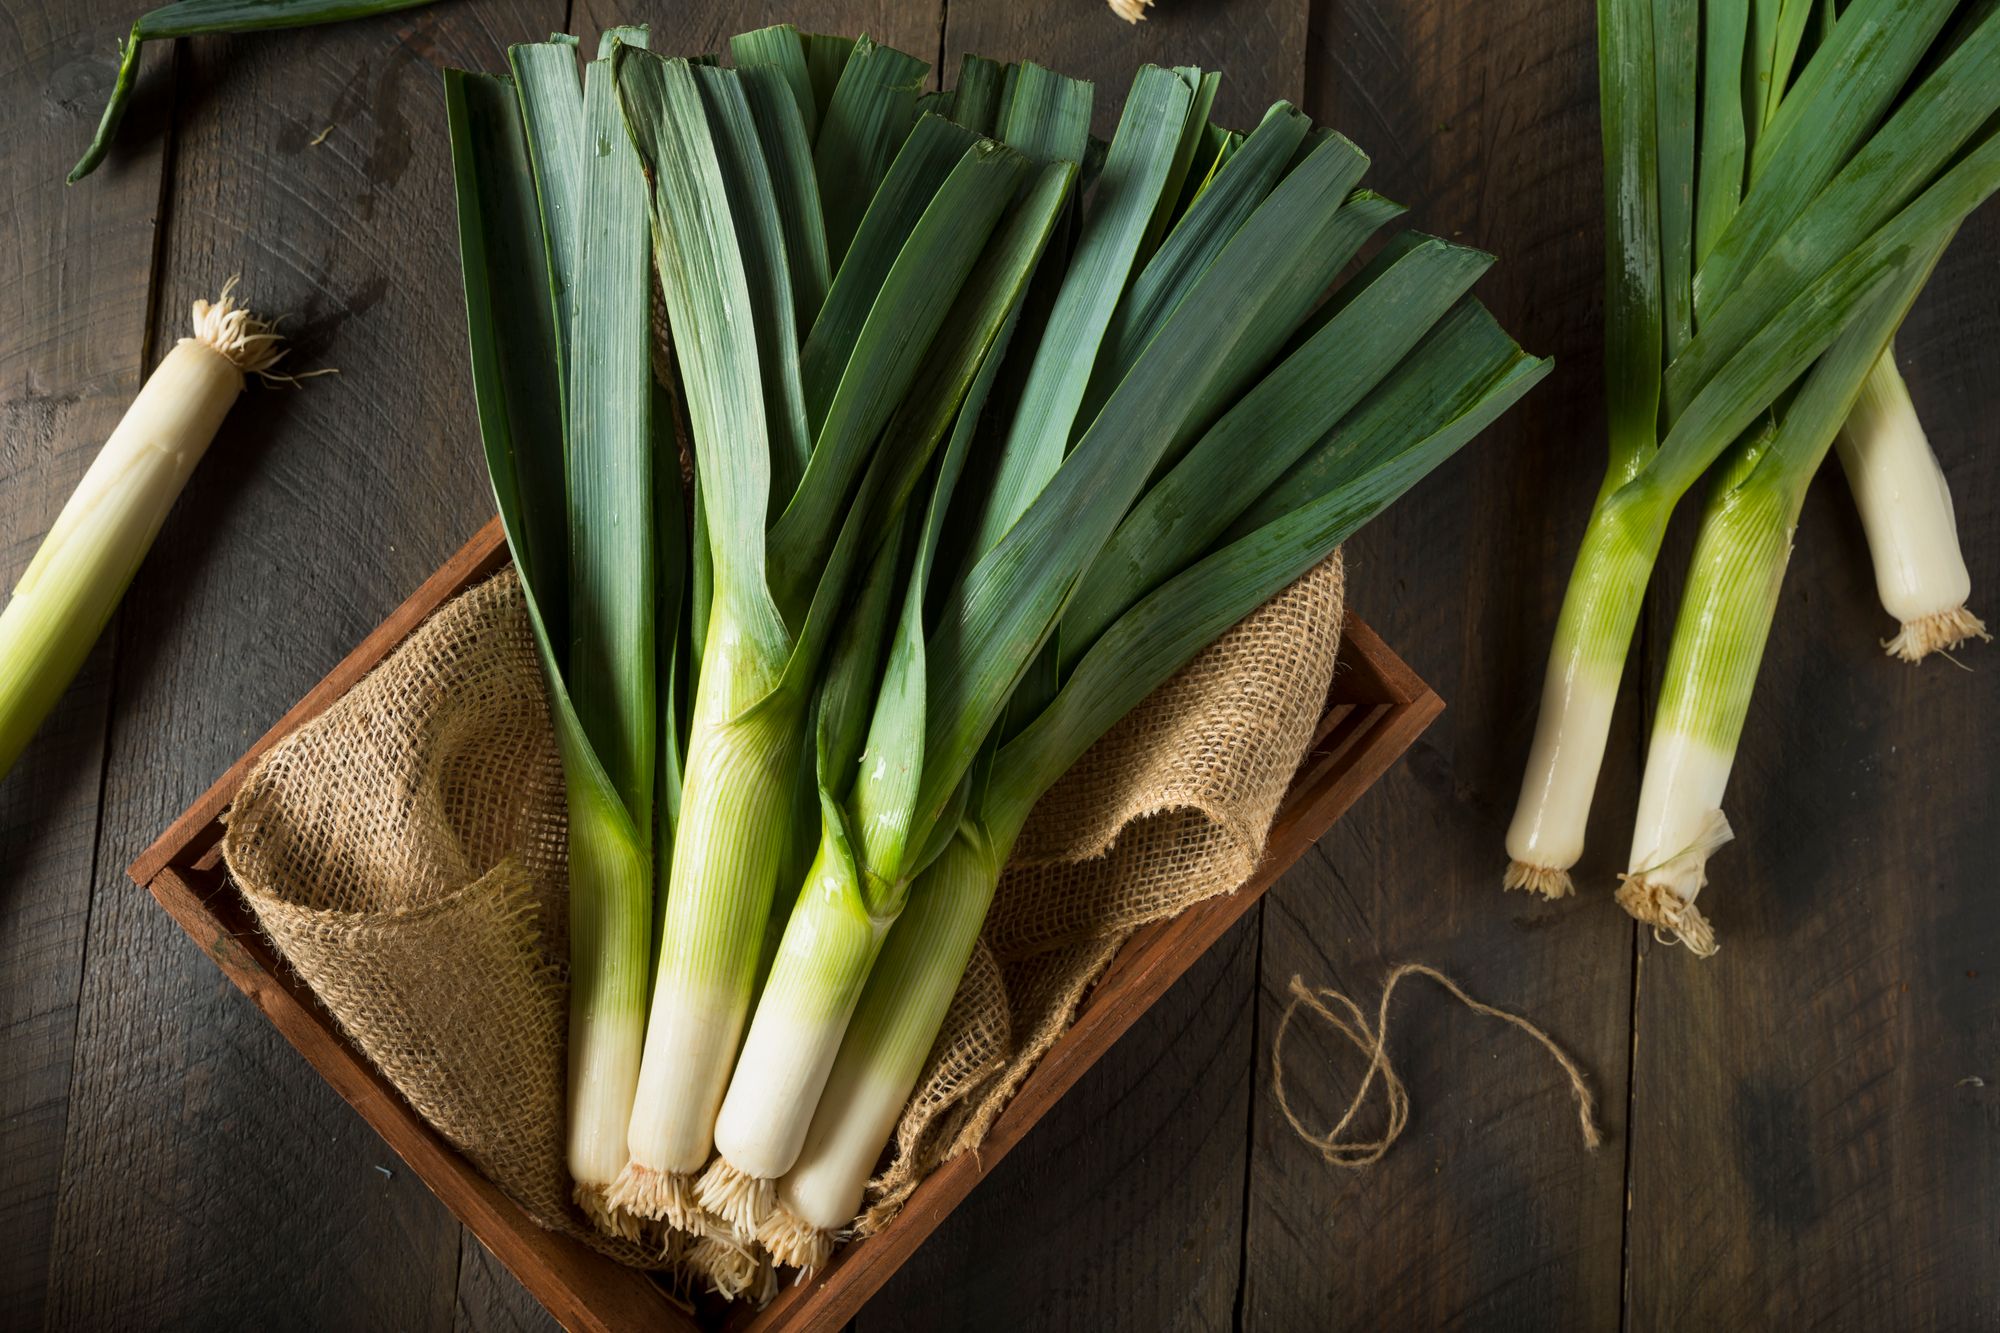 Leeks with Truffle, Hazelnut and Brown Butter Side